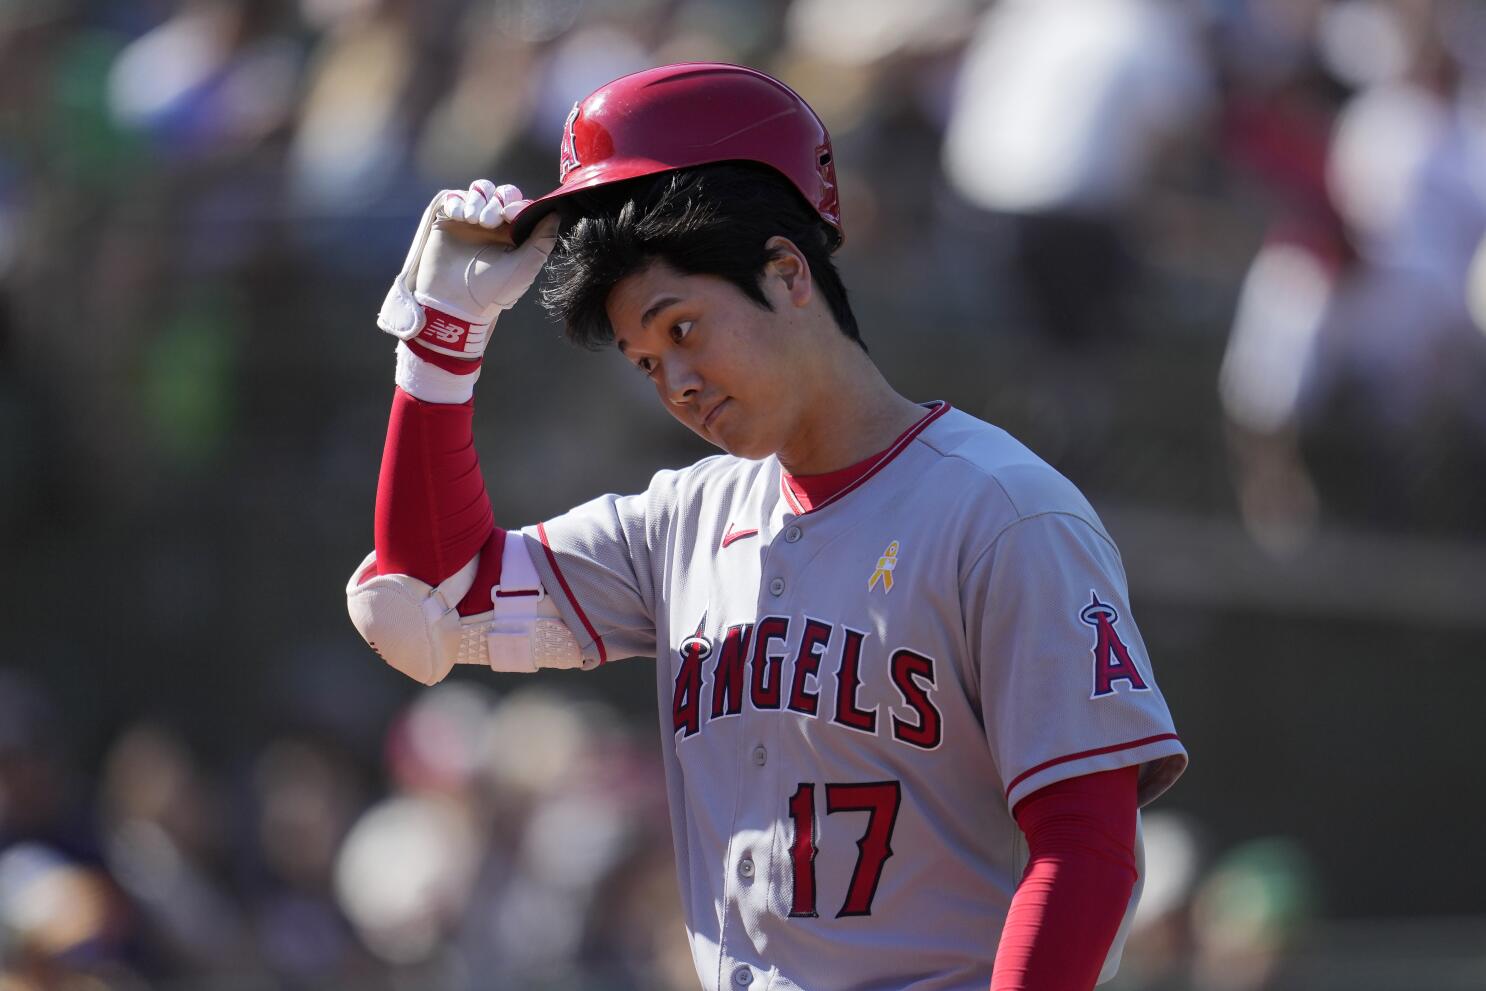 Angels two-way star Shohei Ohtani wins AL Rookie of the Year